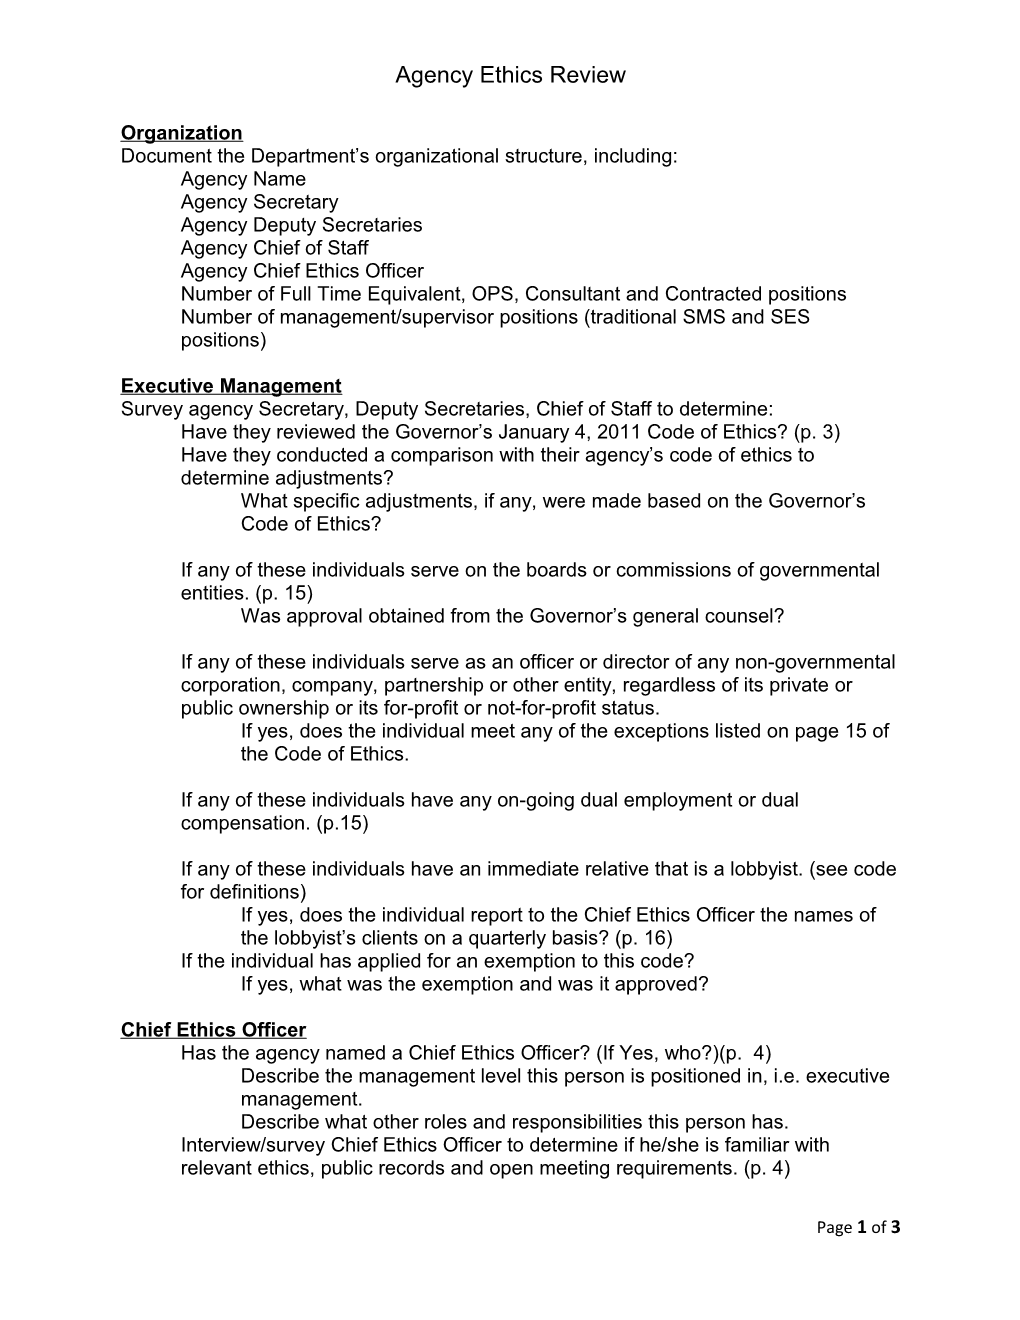 Document the Department S Organizational Structure, Including